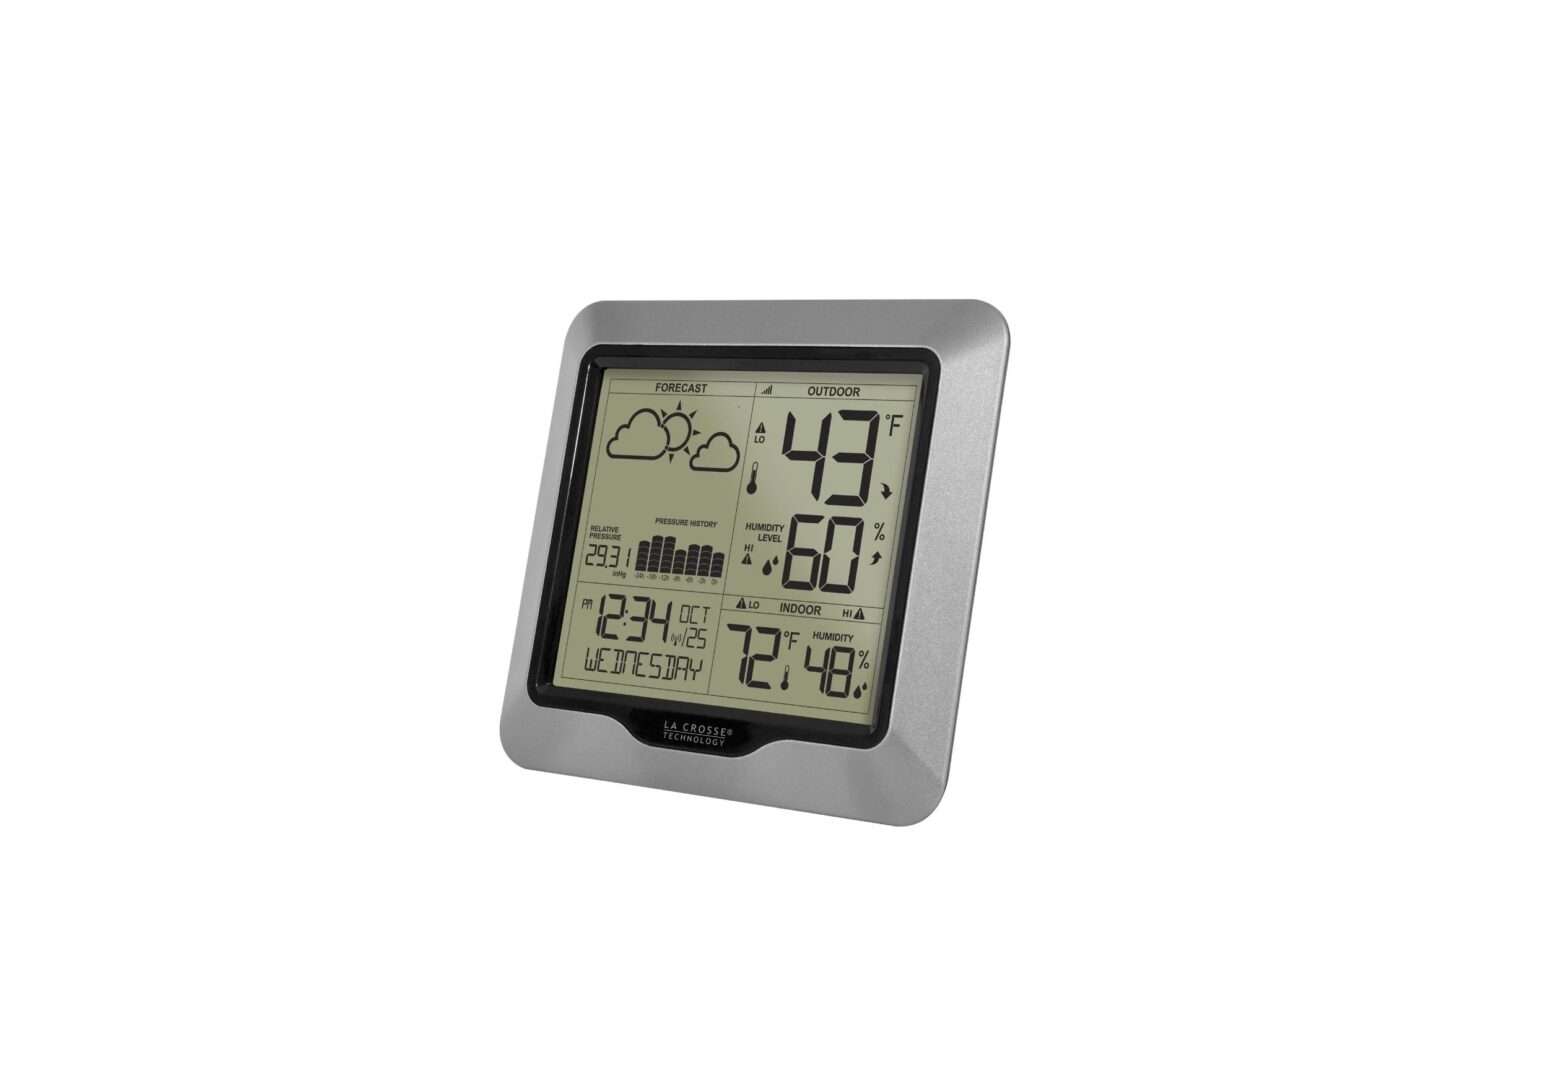 LA Crosse Technology 308-1417V2 Weather Station with Forecast and Atomic Time User Manual - Featured image